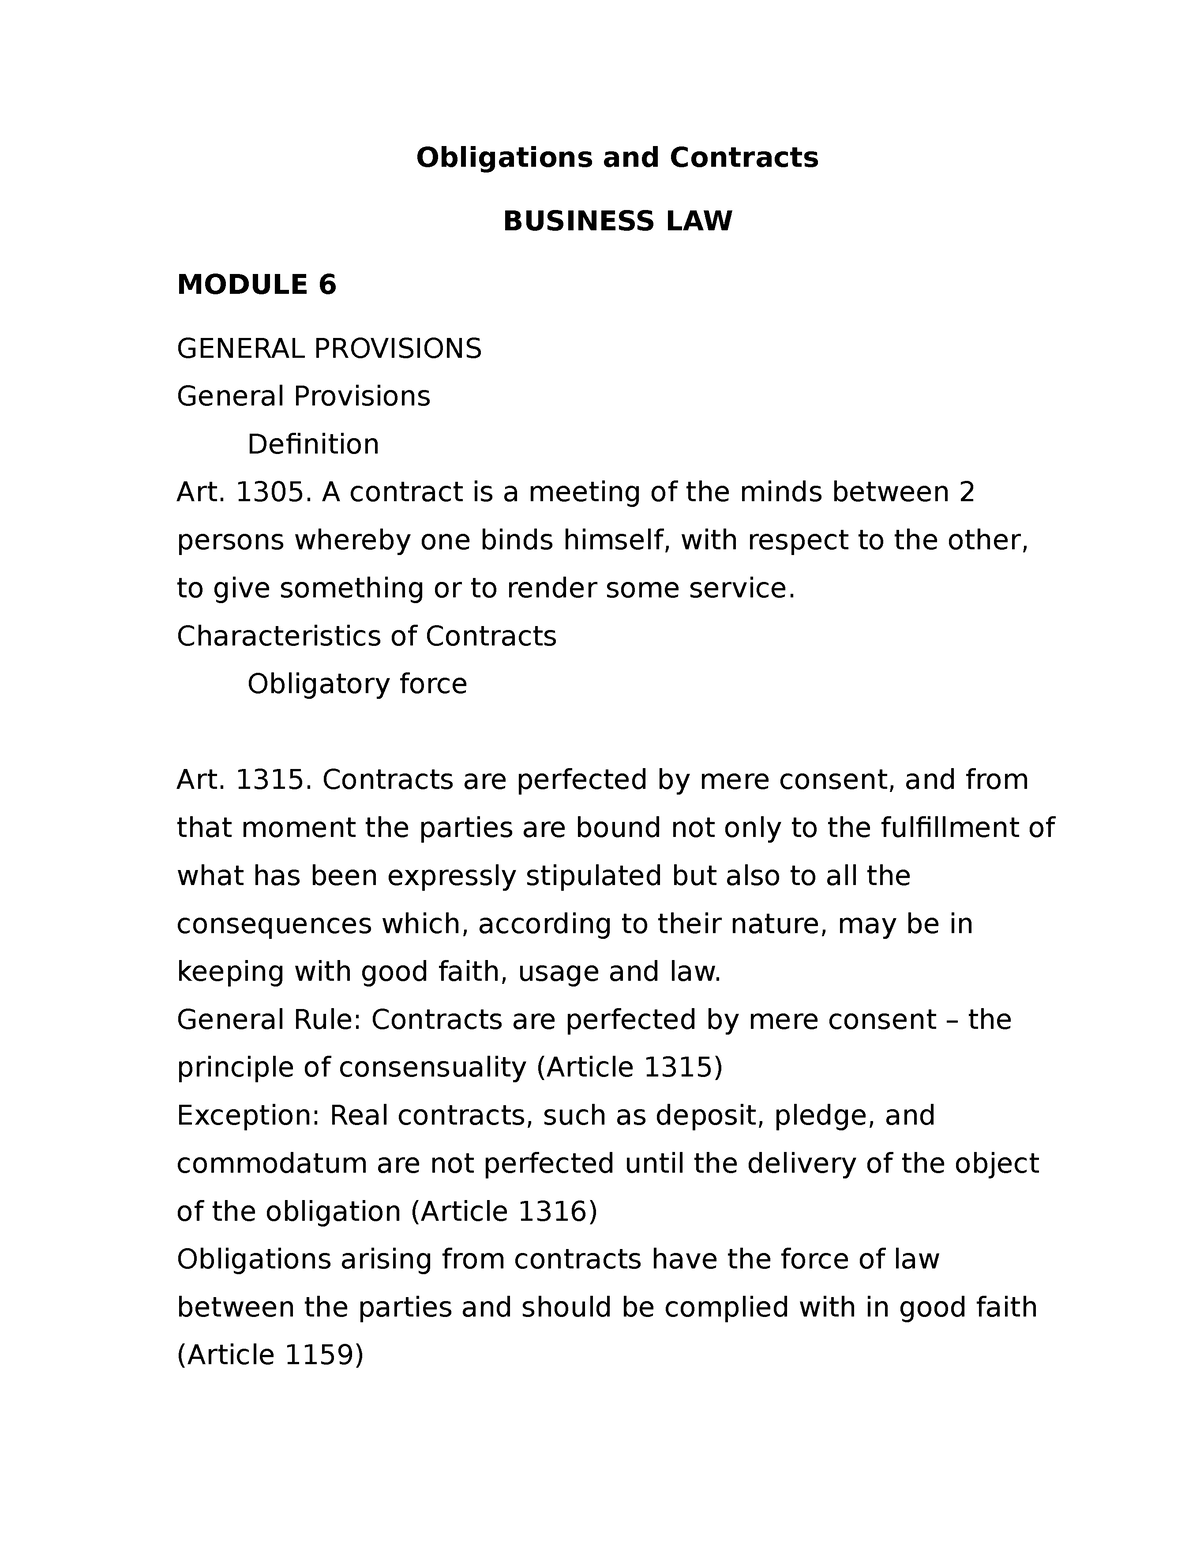 Oblicon Obligations And Contracts Business Law Detailed Summary Module Obligations And